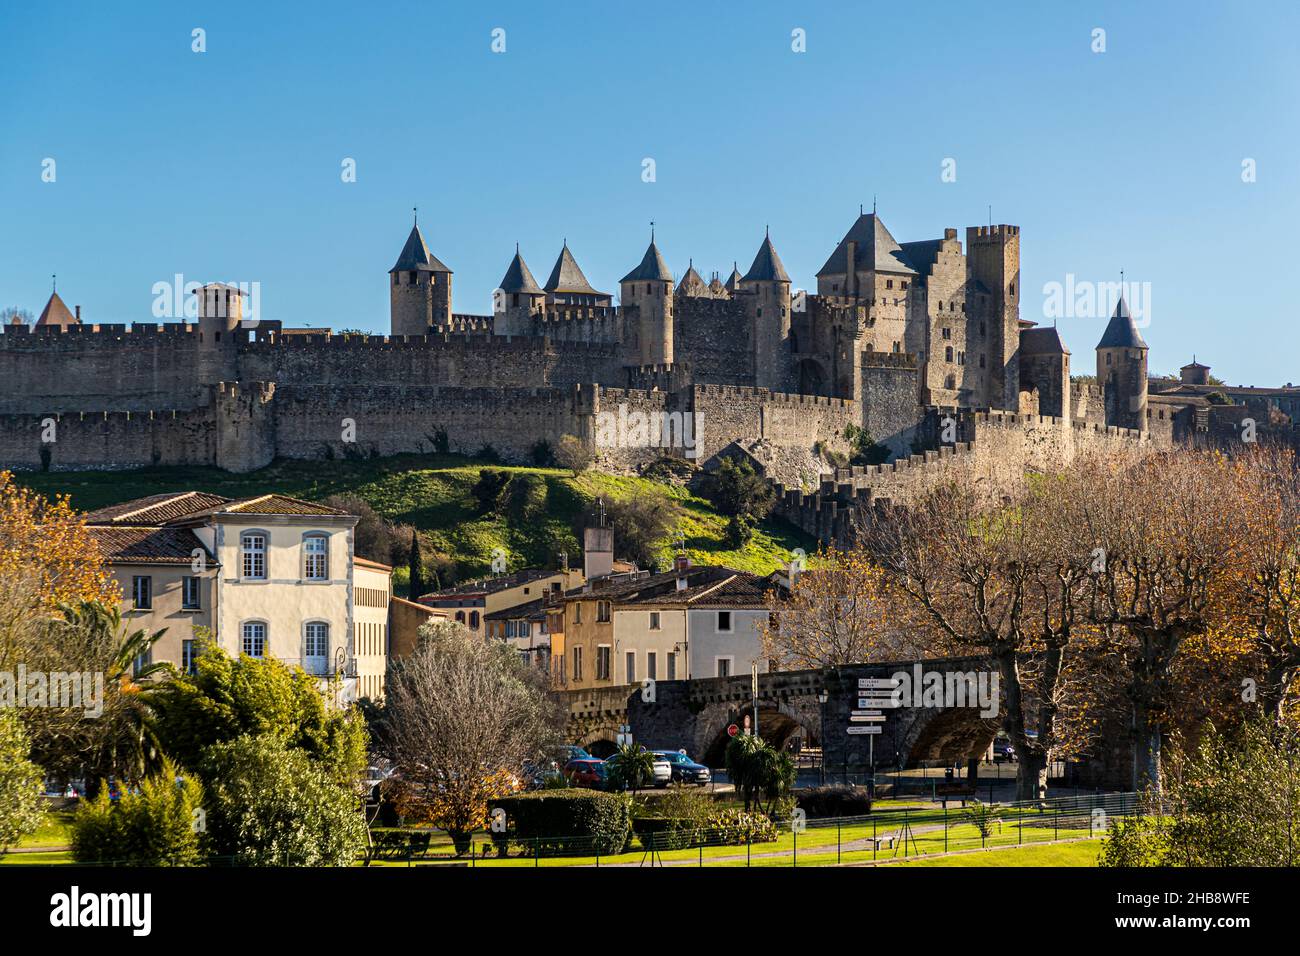 The old town fortress of Carcassonne is located behind the 14th century Pont Vieux, which crosses the river Aude. Carcassonne, France Stock Photo